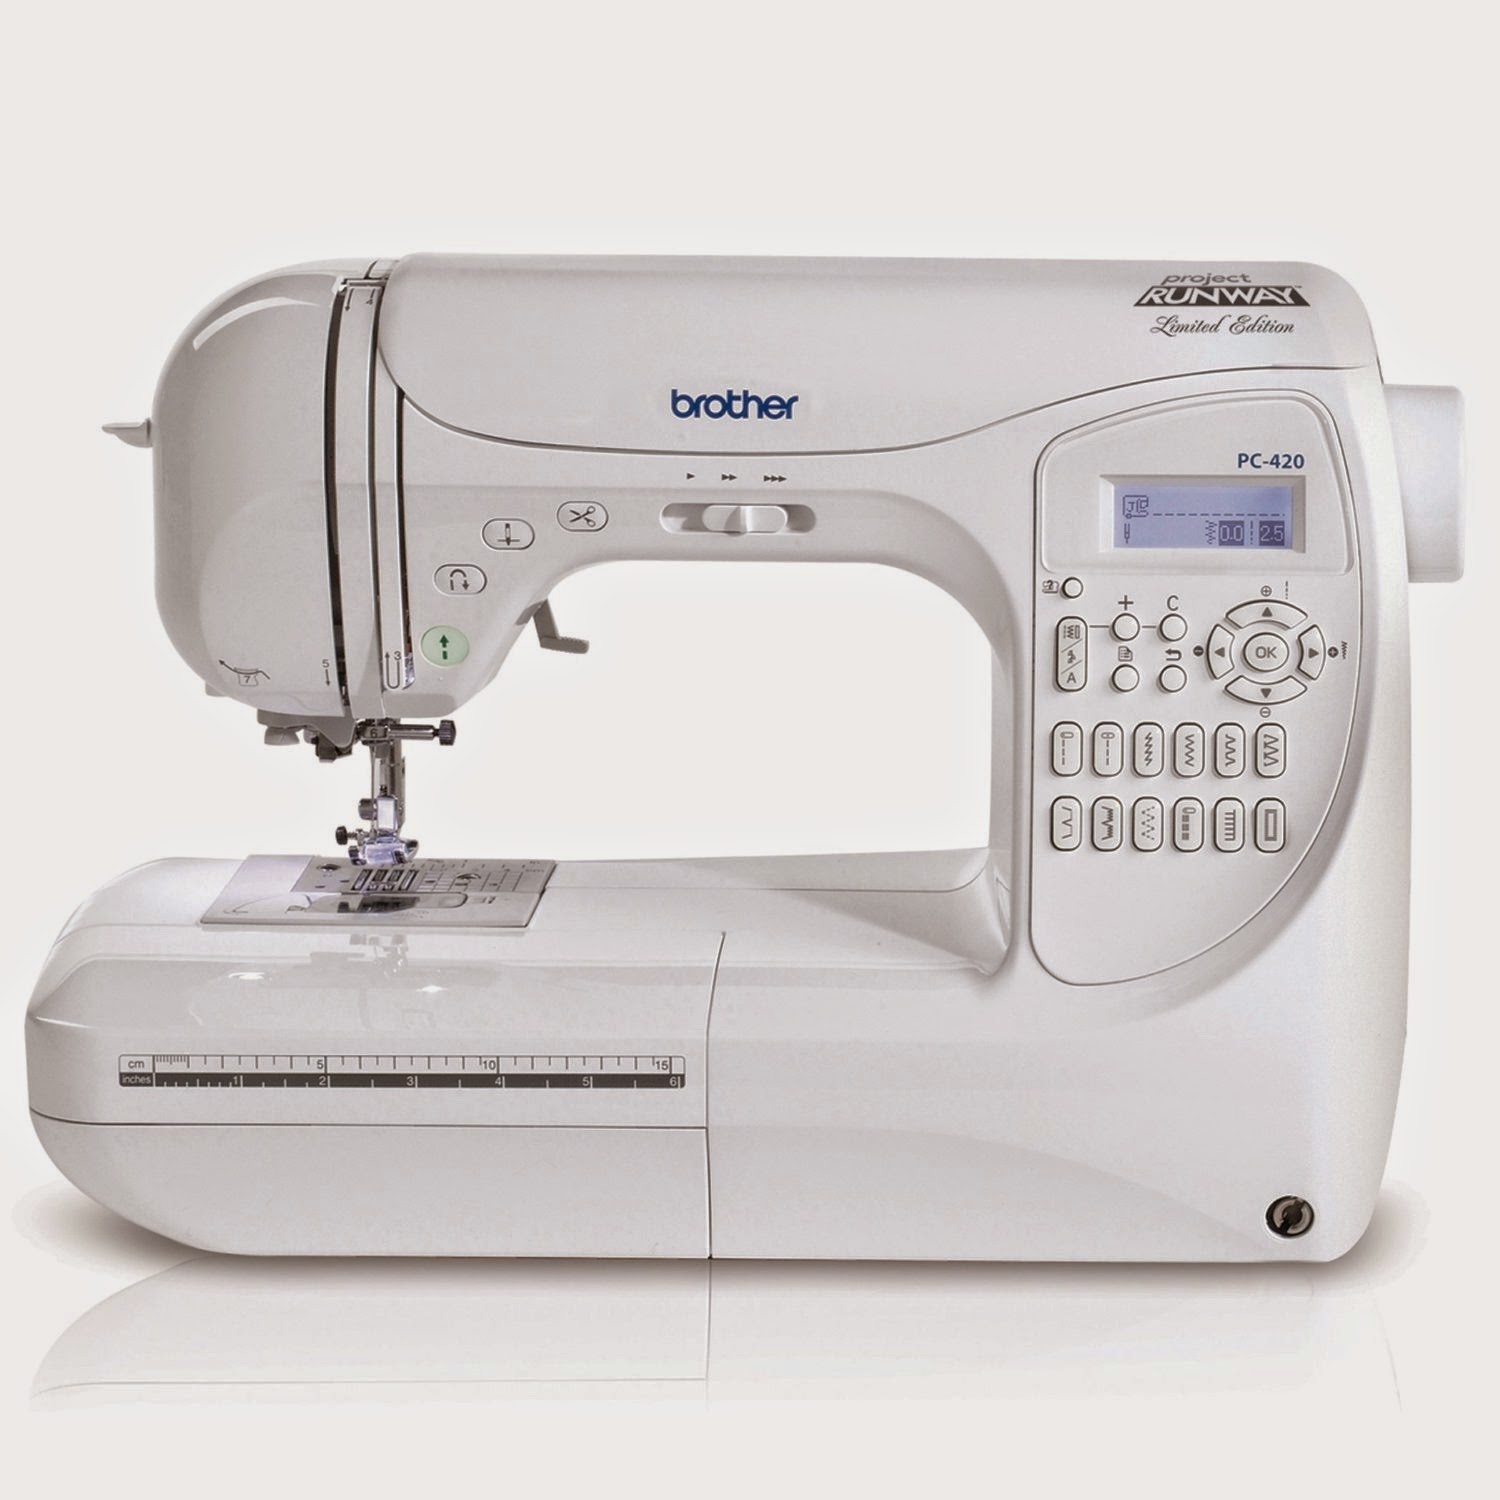 Sewing Machine, best features to look for when choosing a sewing machine, lightweight or heavyweight, variety of stitches, free arm or flat bed, sewing machine feet, buttonhole feature, auto needle threader, auto tension